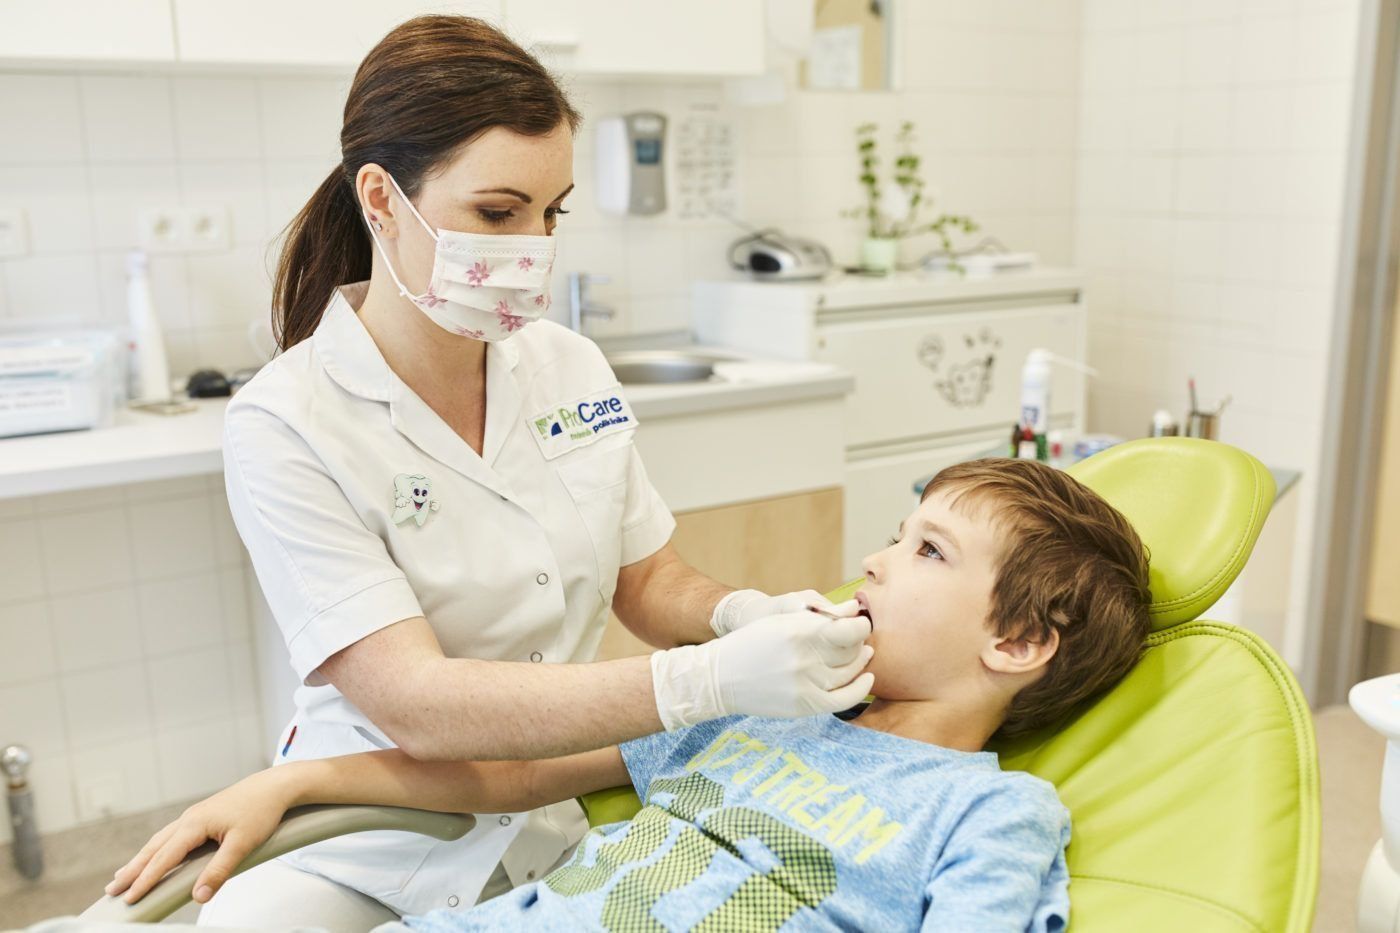 The best paid dental clinics for children in Omsk in 2020